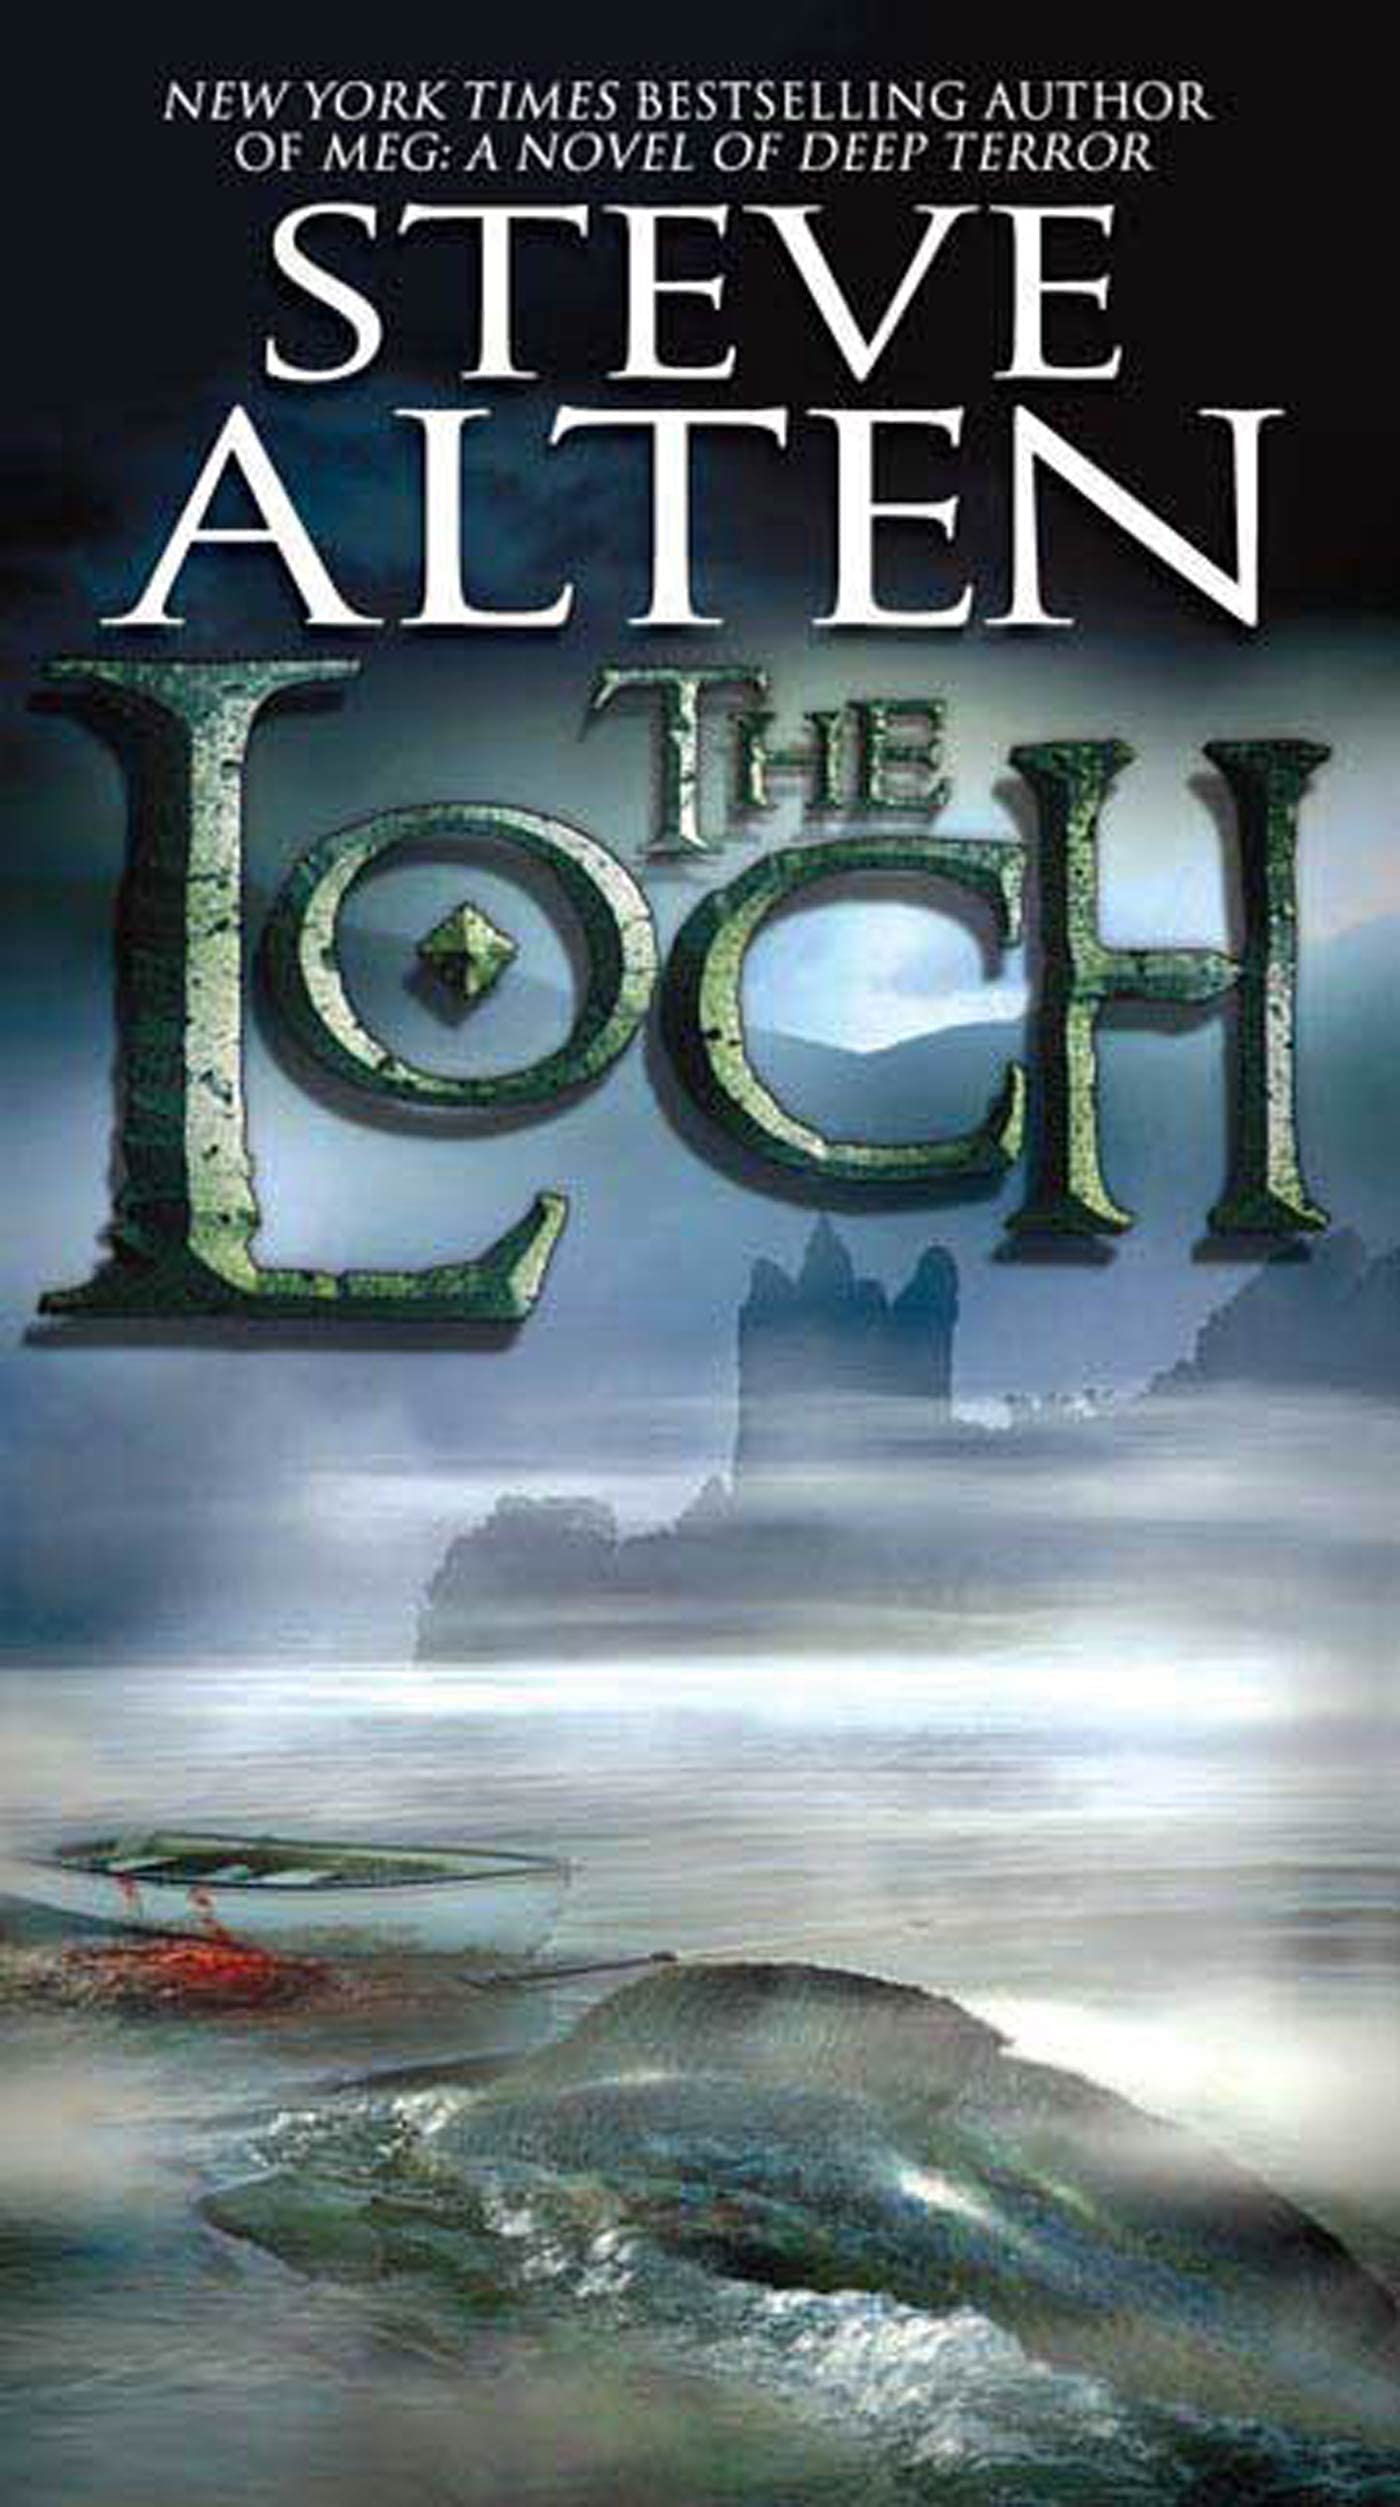 Image for "The Loch"